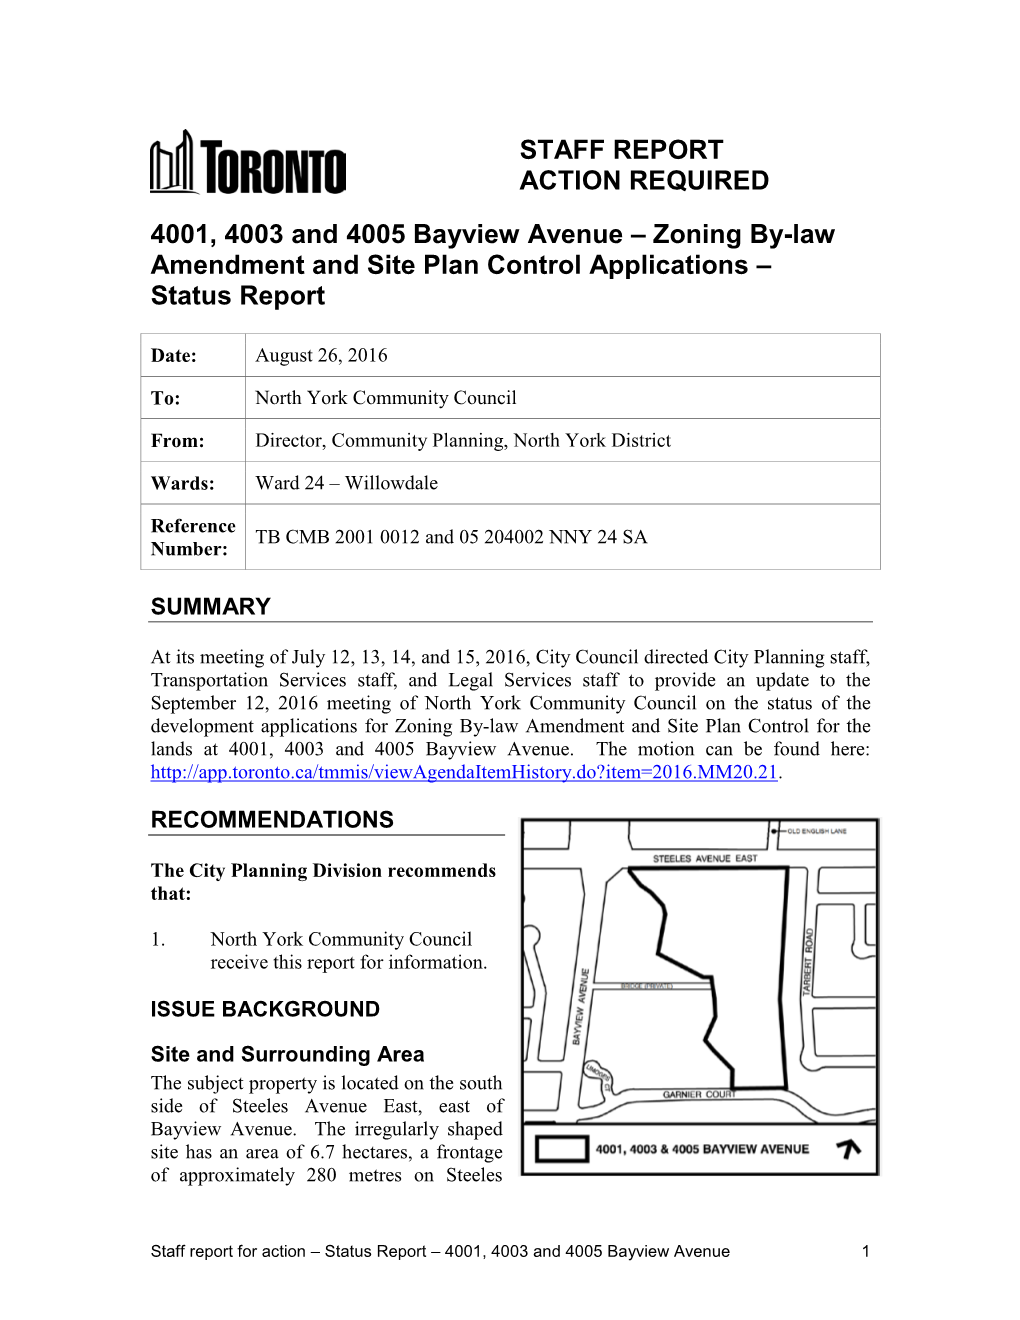 4001, 4003 and 4005 Bayview Avenue – Zoning By-Law Amendment and Site Plan Control Applications – Status Report